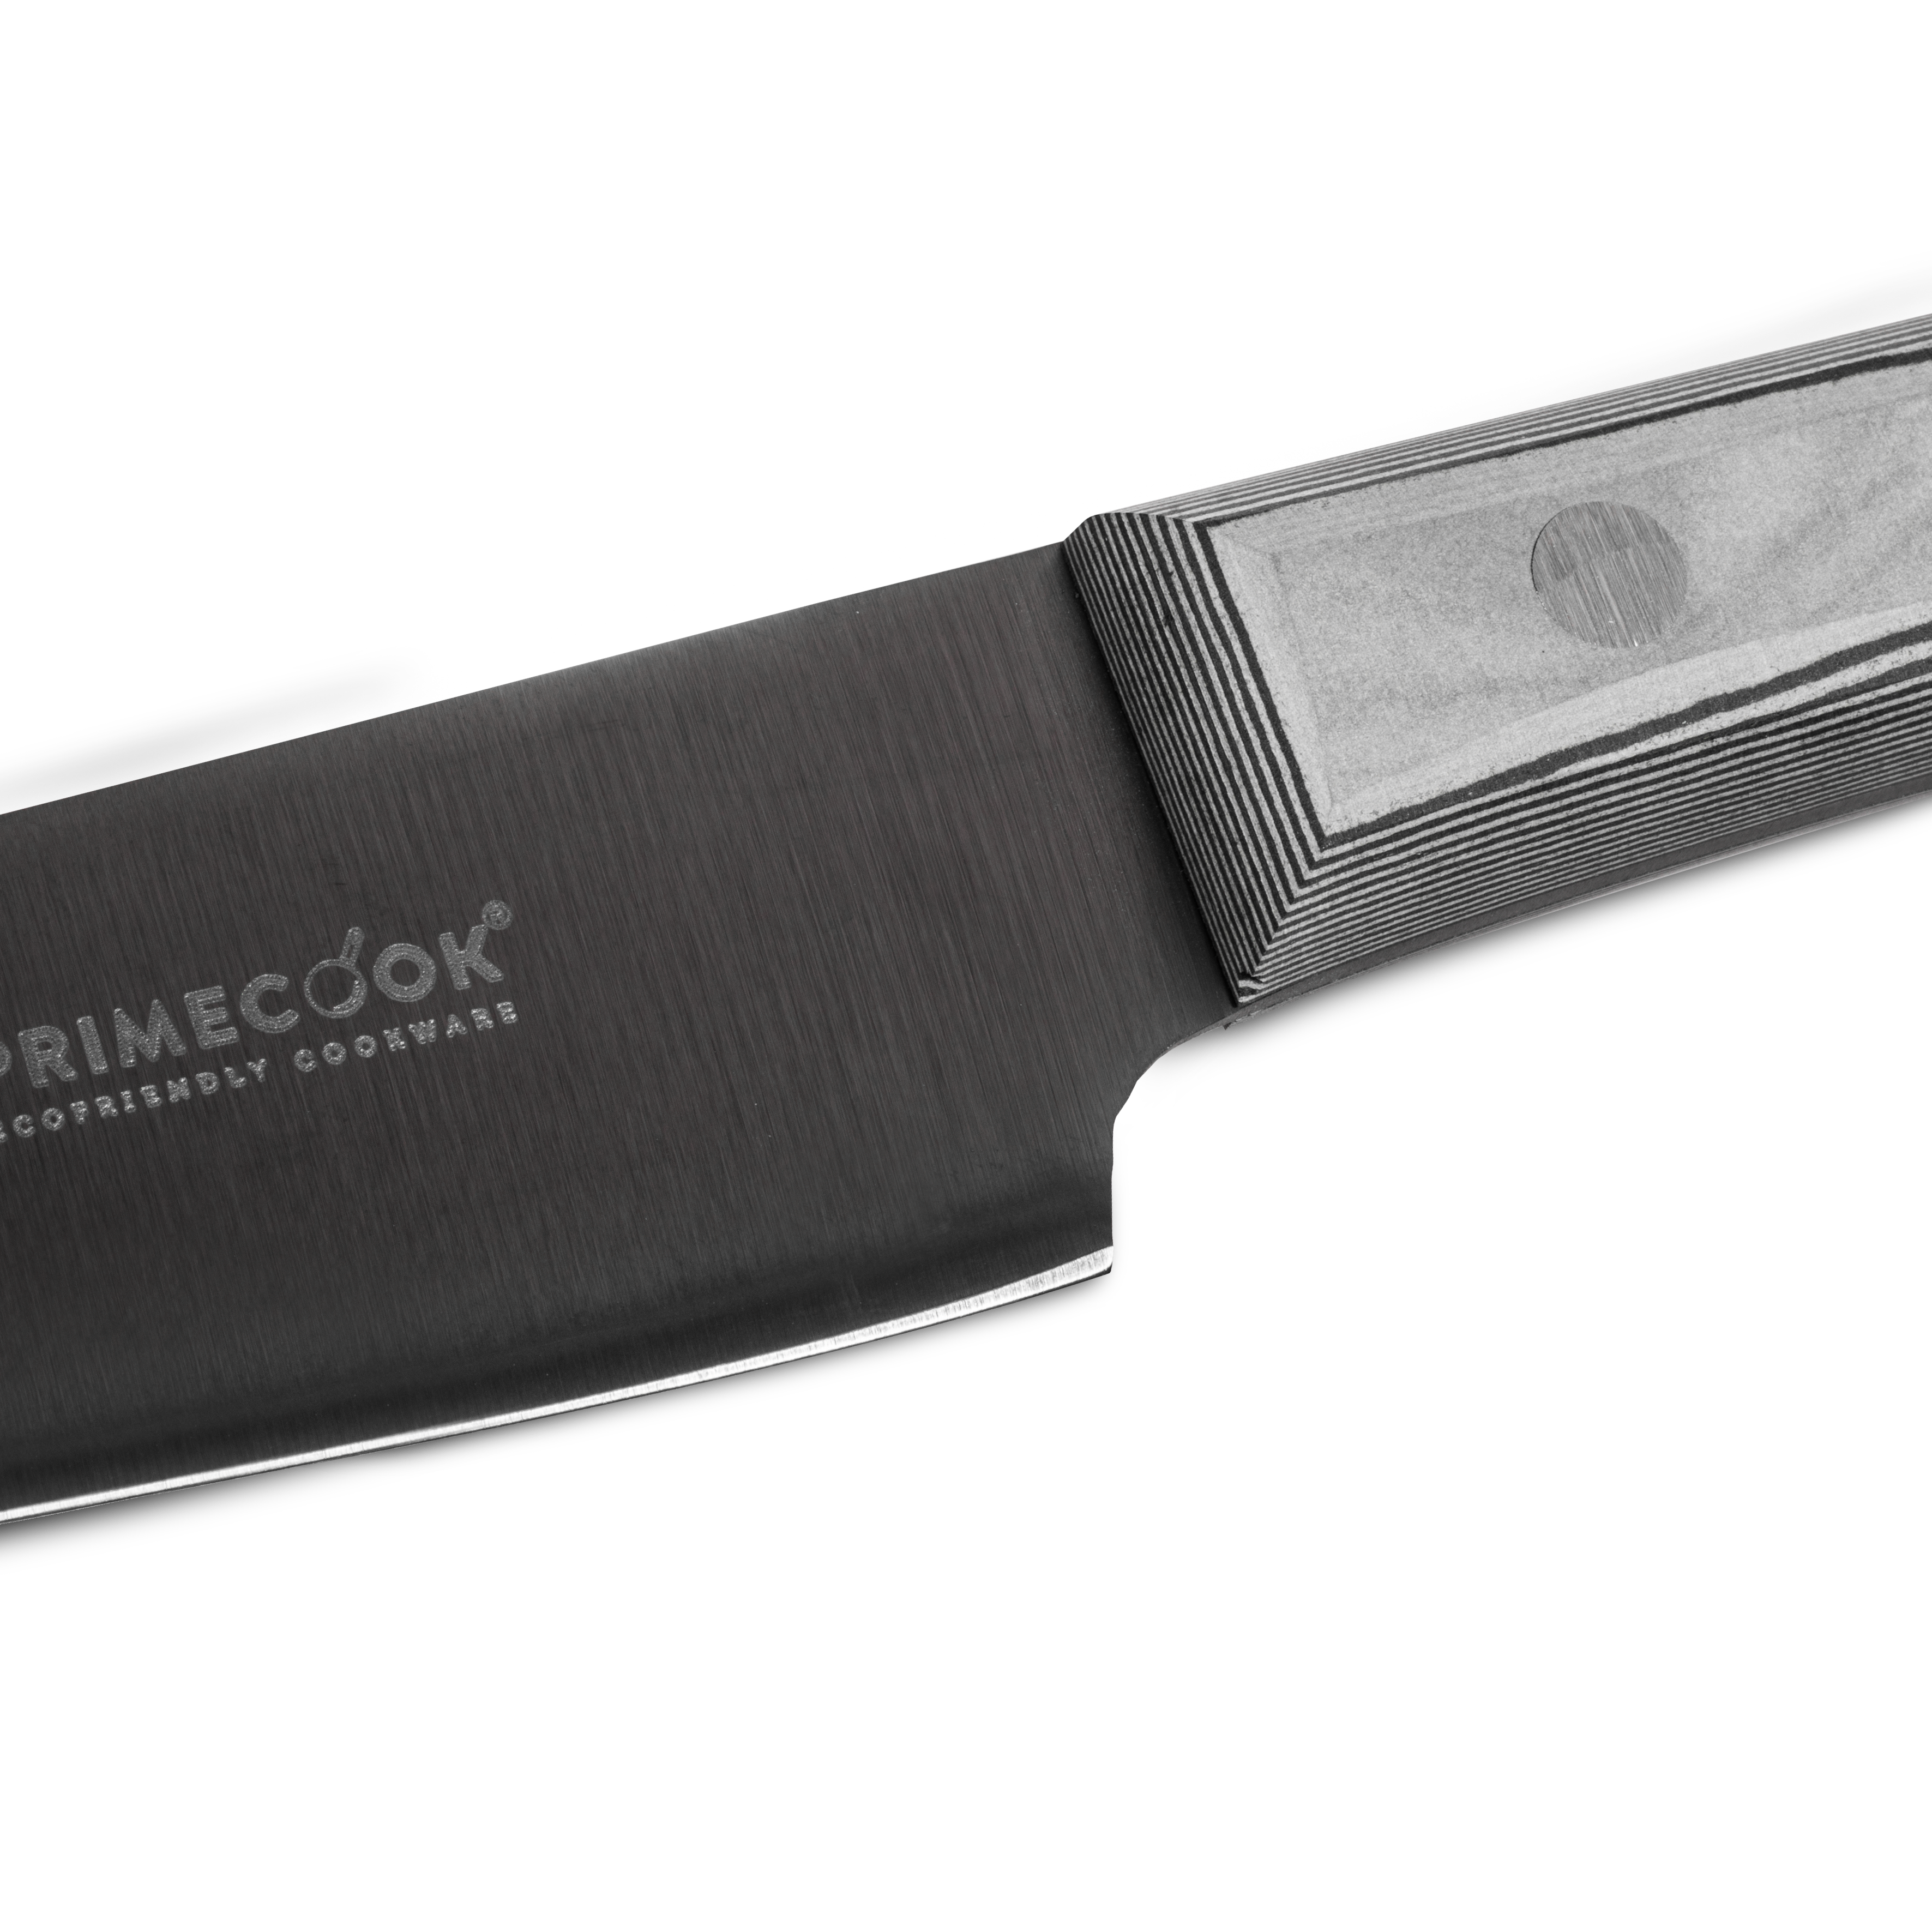 Professional Cook’s Knife - 5 in